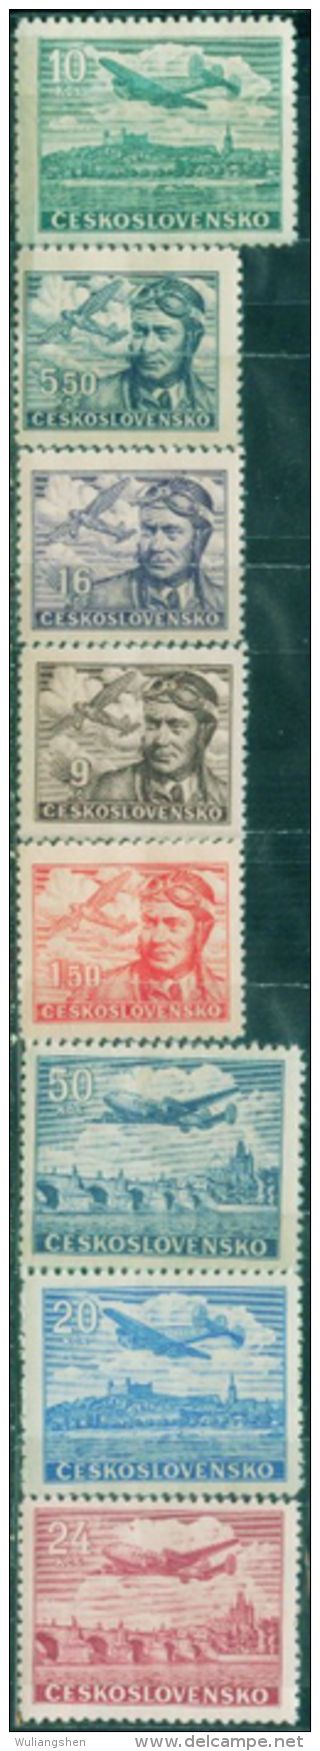 JK0865 Czechoslovakia 1946-47 Airline Tickets Pilots And Charles Bridge 9v MNH - Unused Stamps